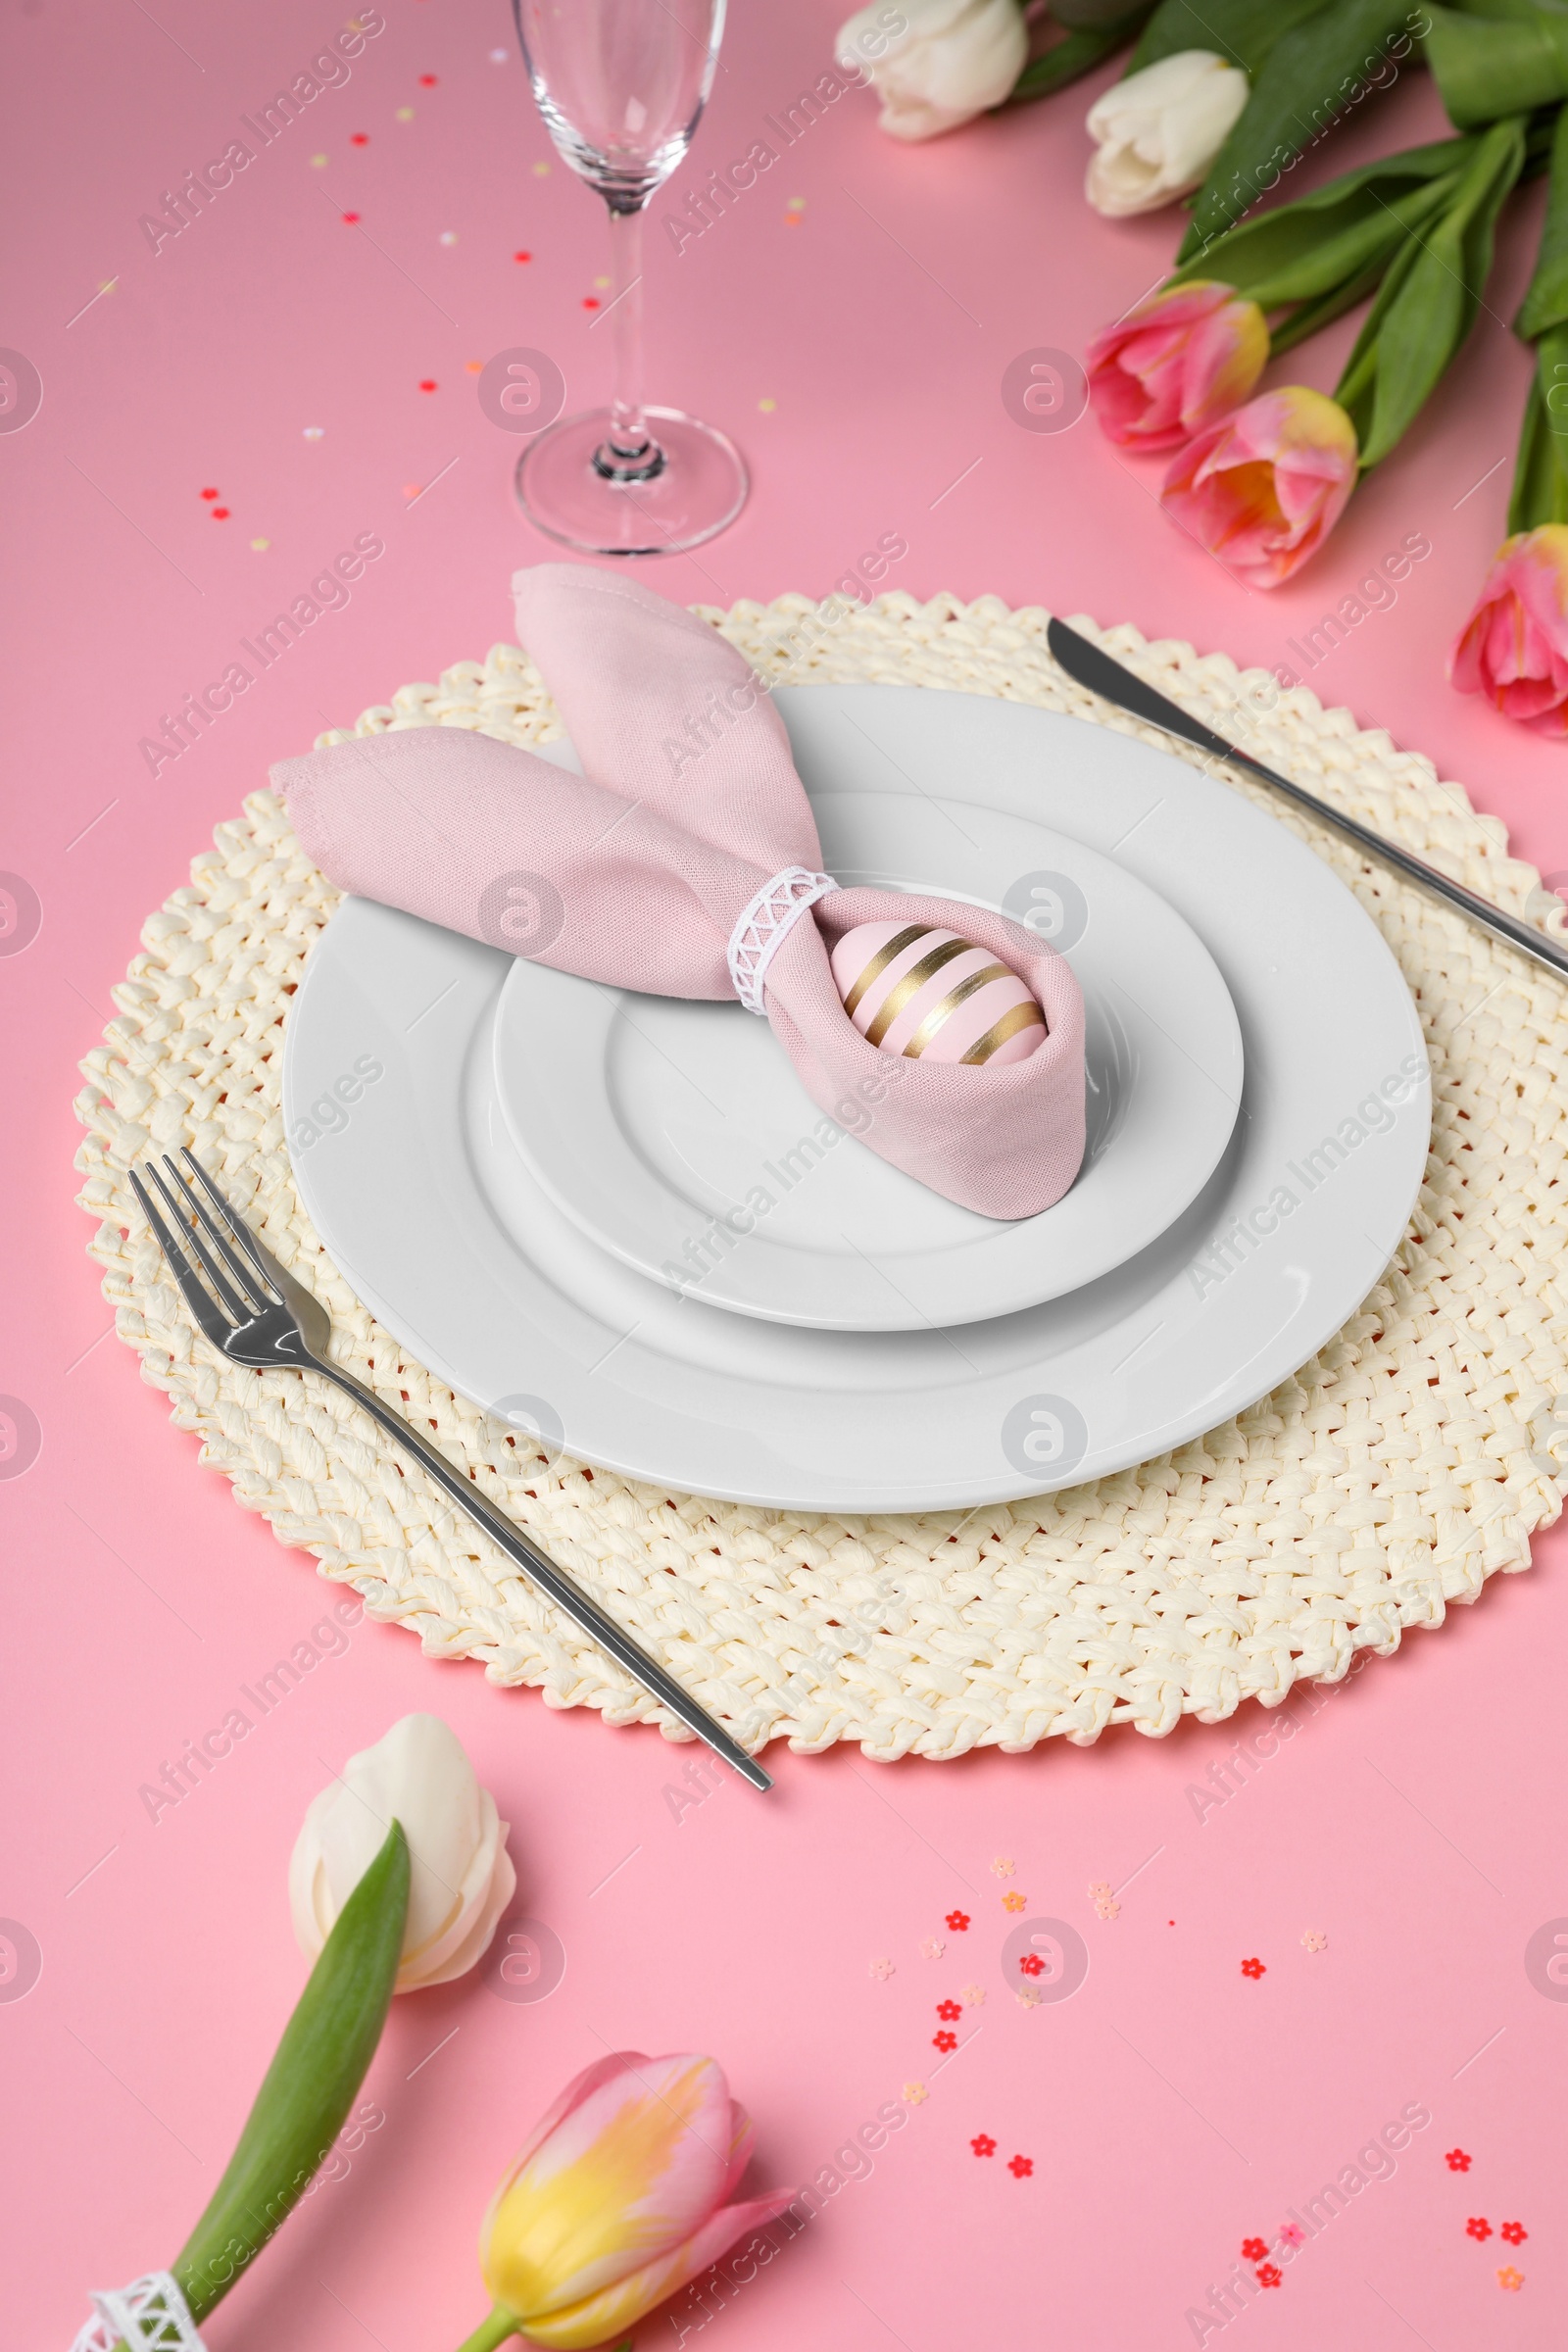 Photo of Festive table setting with painted egg, plates and tulips on pink background. Easter celebration